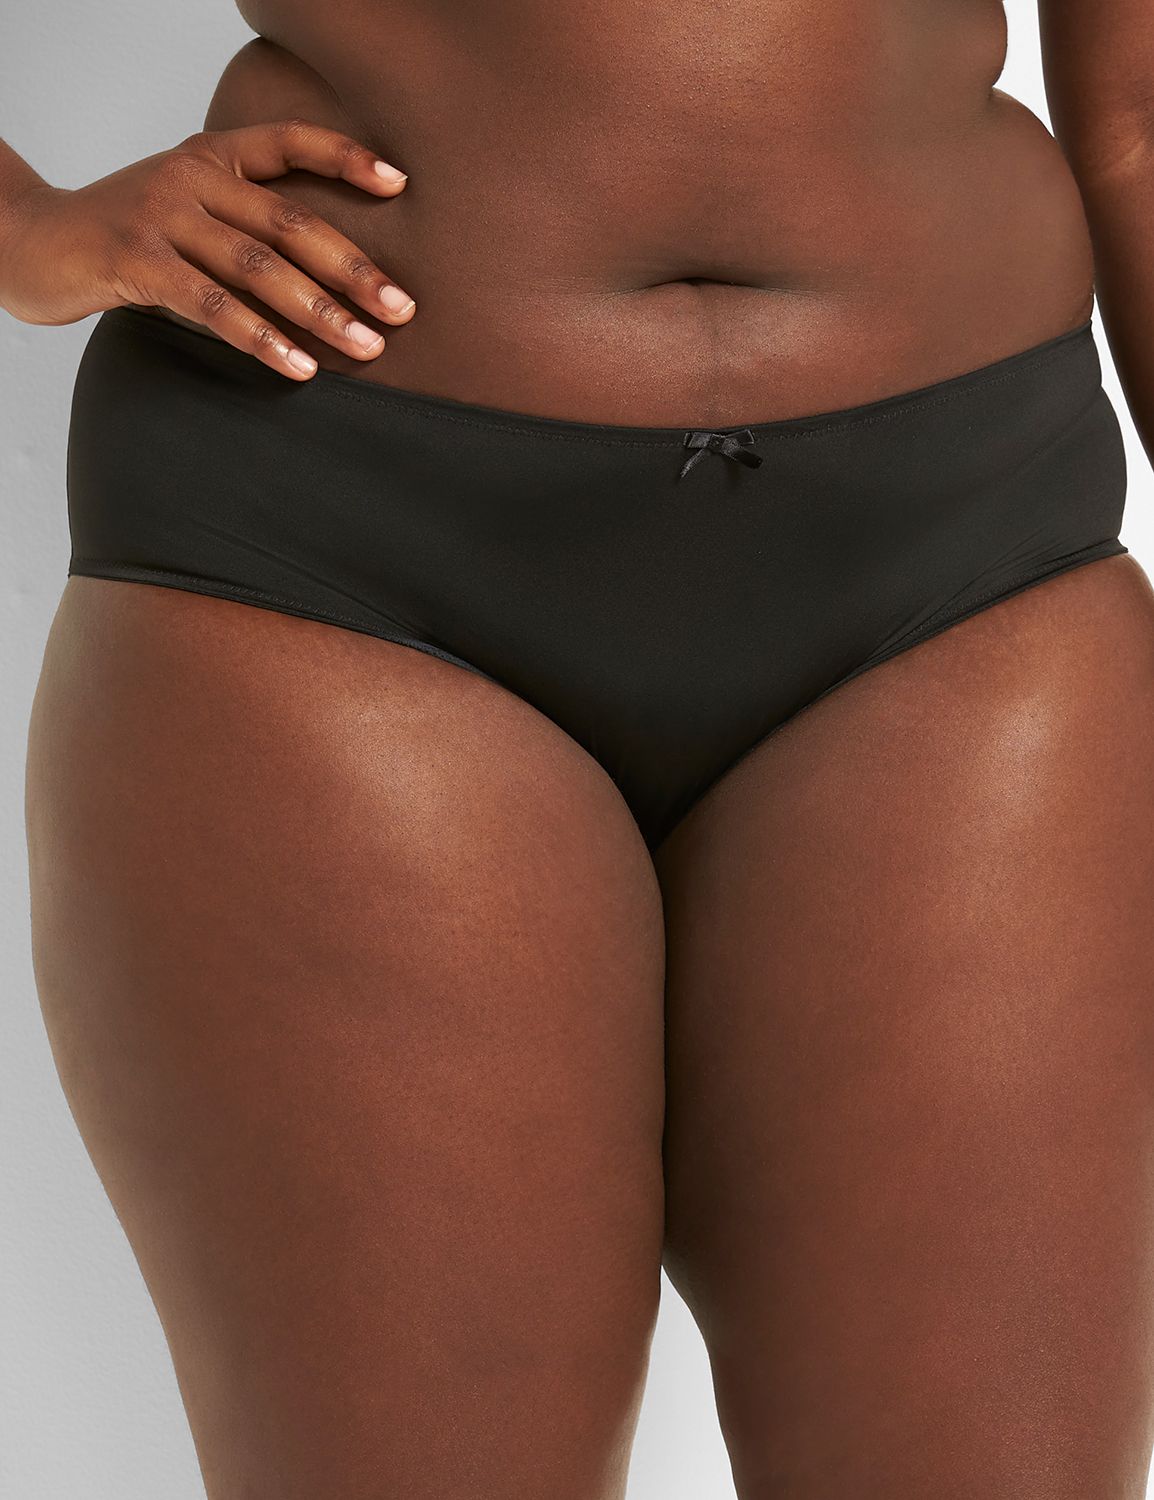 Lane Bryant - #ImNoAngel panties are here! Get your booty in 'em before  they're gone.